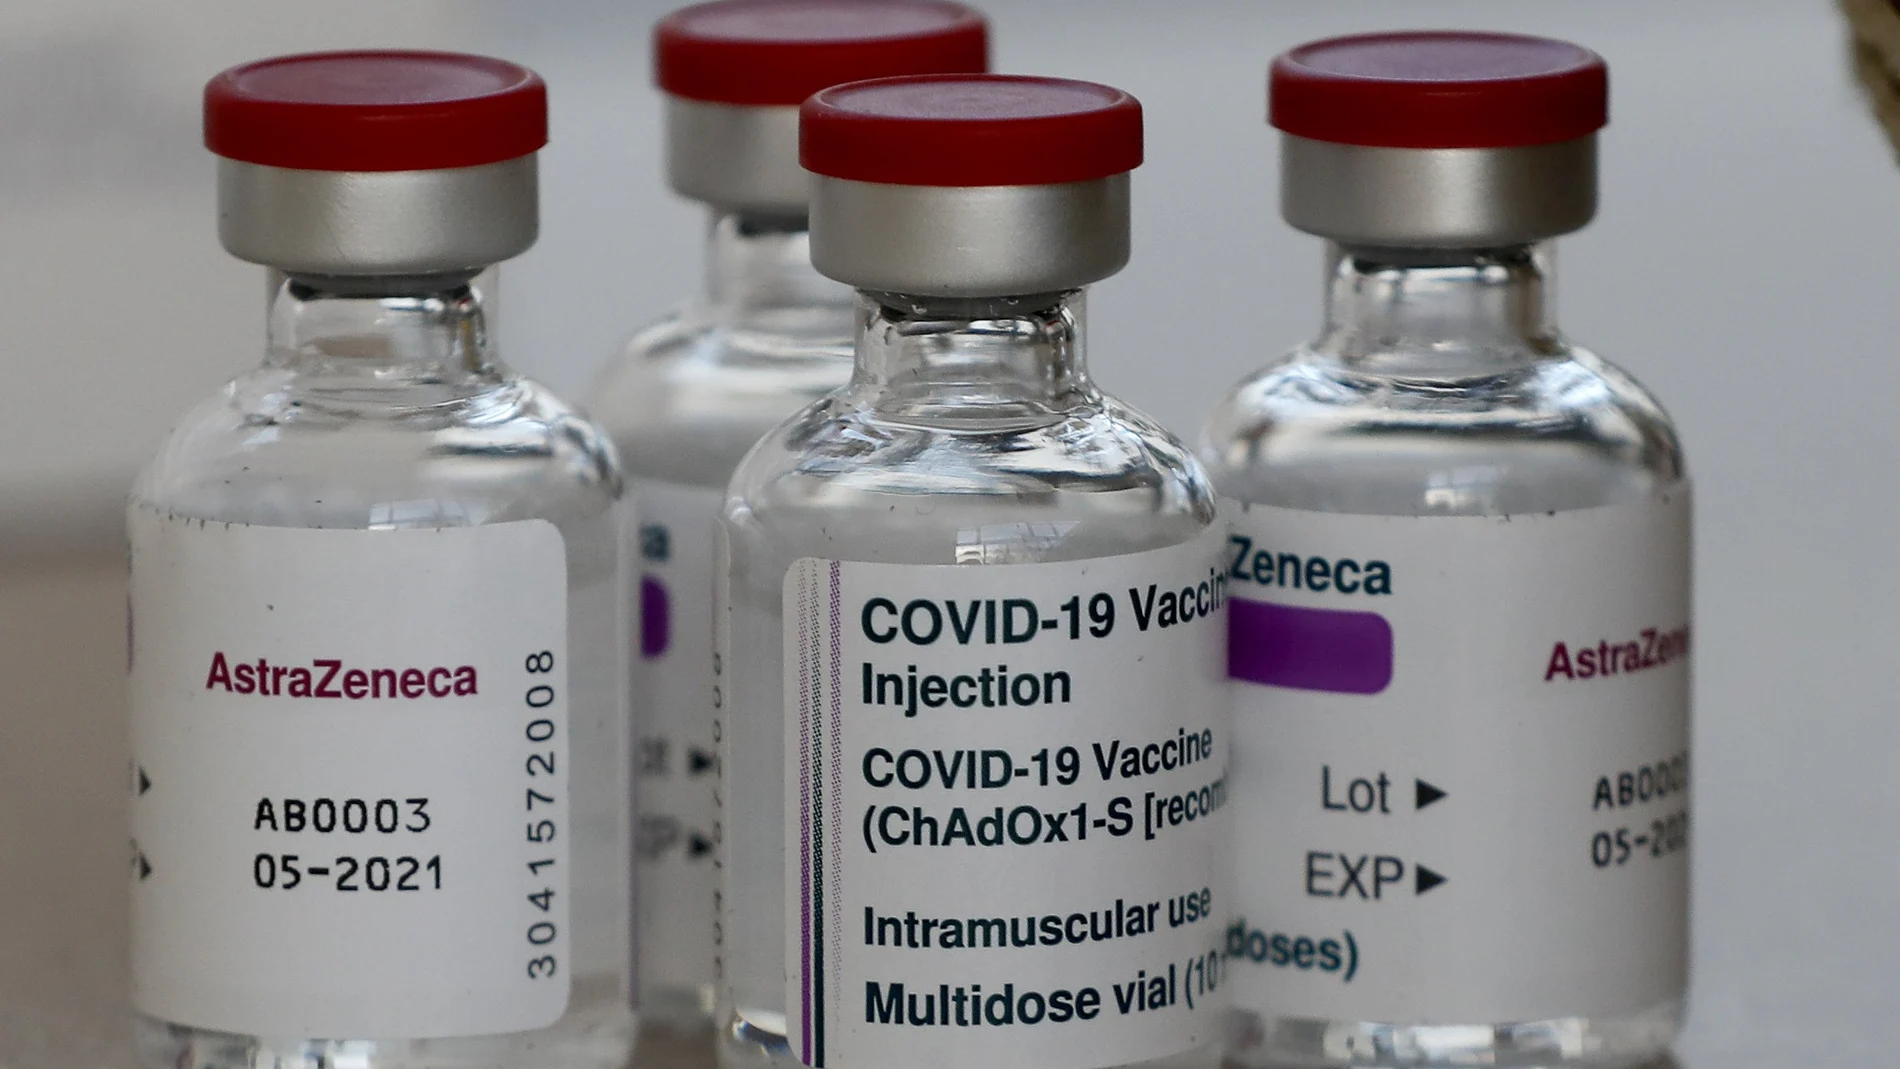 AstraZeneca vaccine is ready to be used at the Wellcome Centre in Ilford, east London, Friday, Feb. 5, 2021. (AP Photo/Frank Augstein)